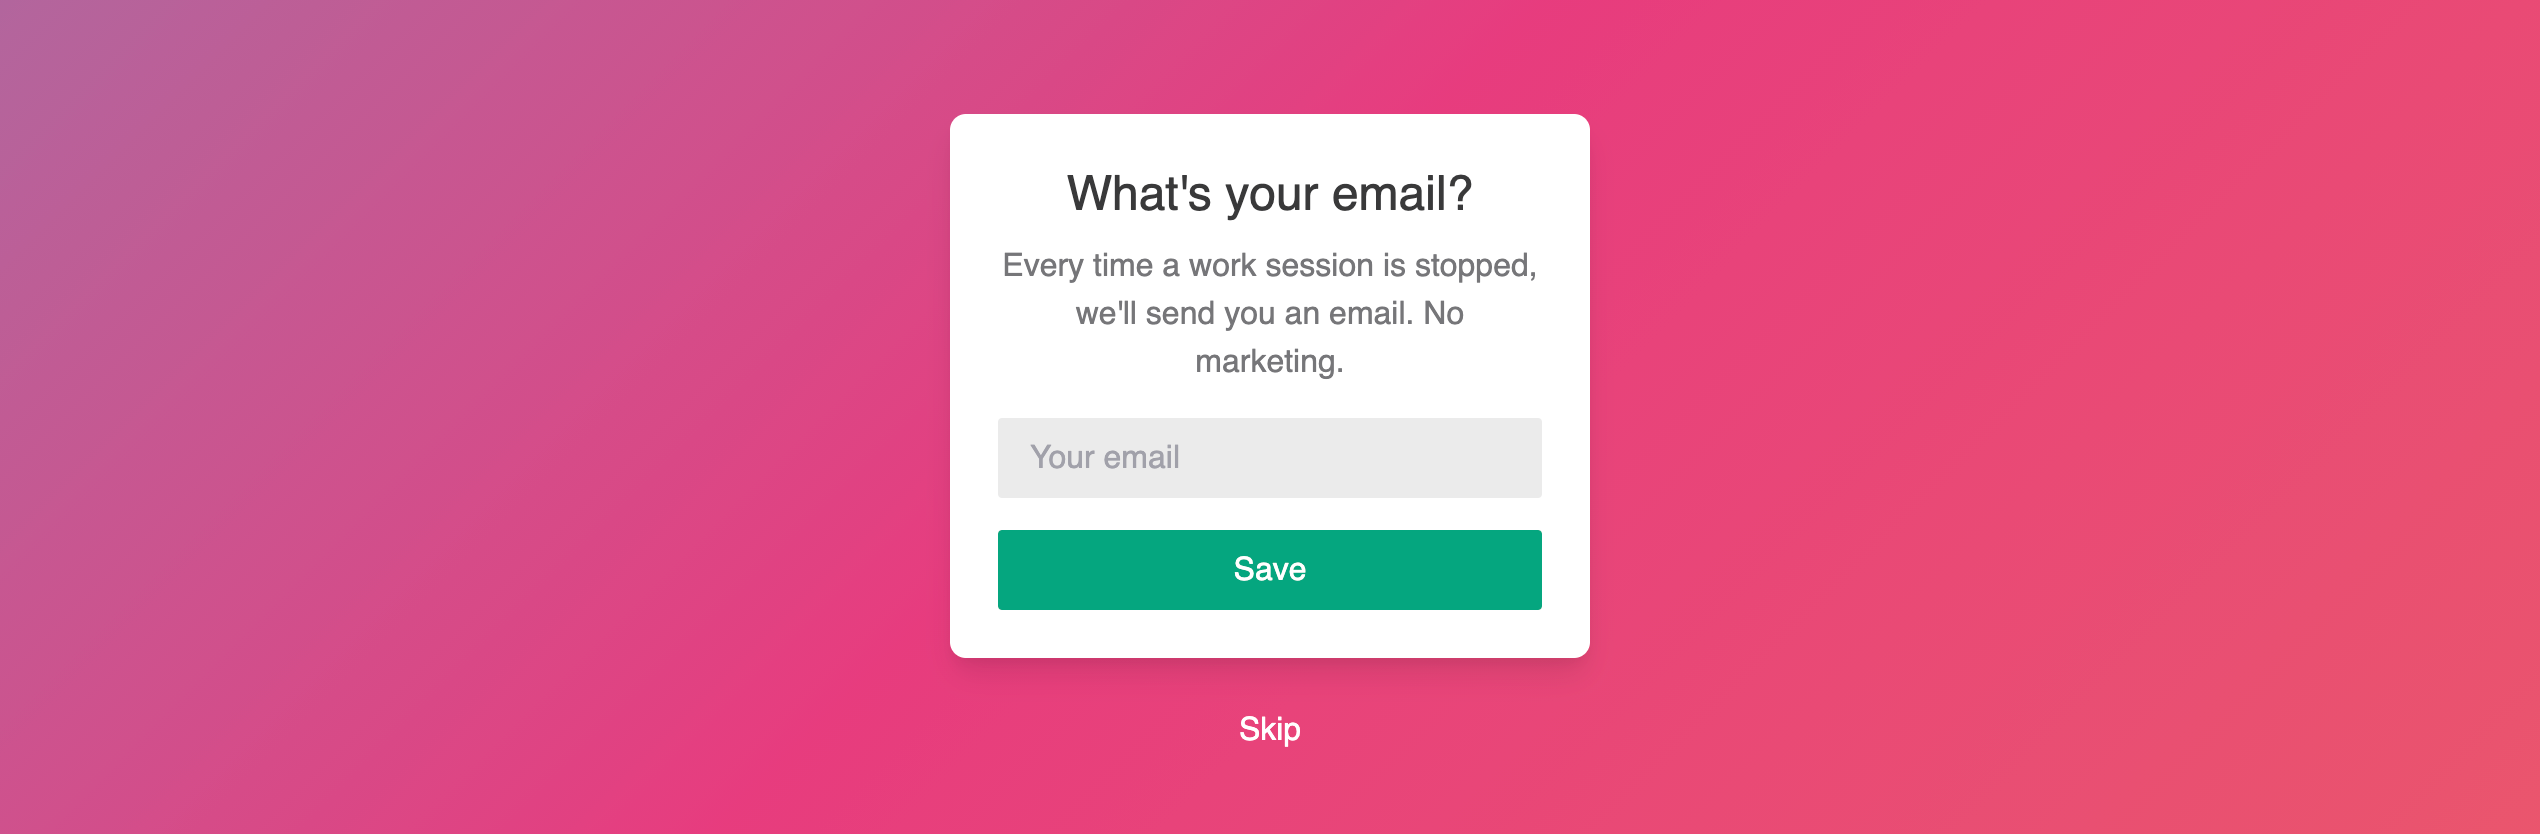 Get feedback from a vast remote working audience about Tim Tracker